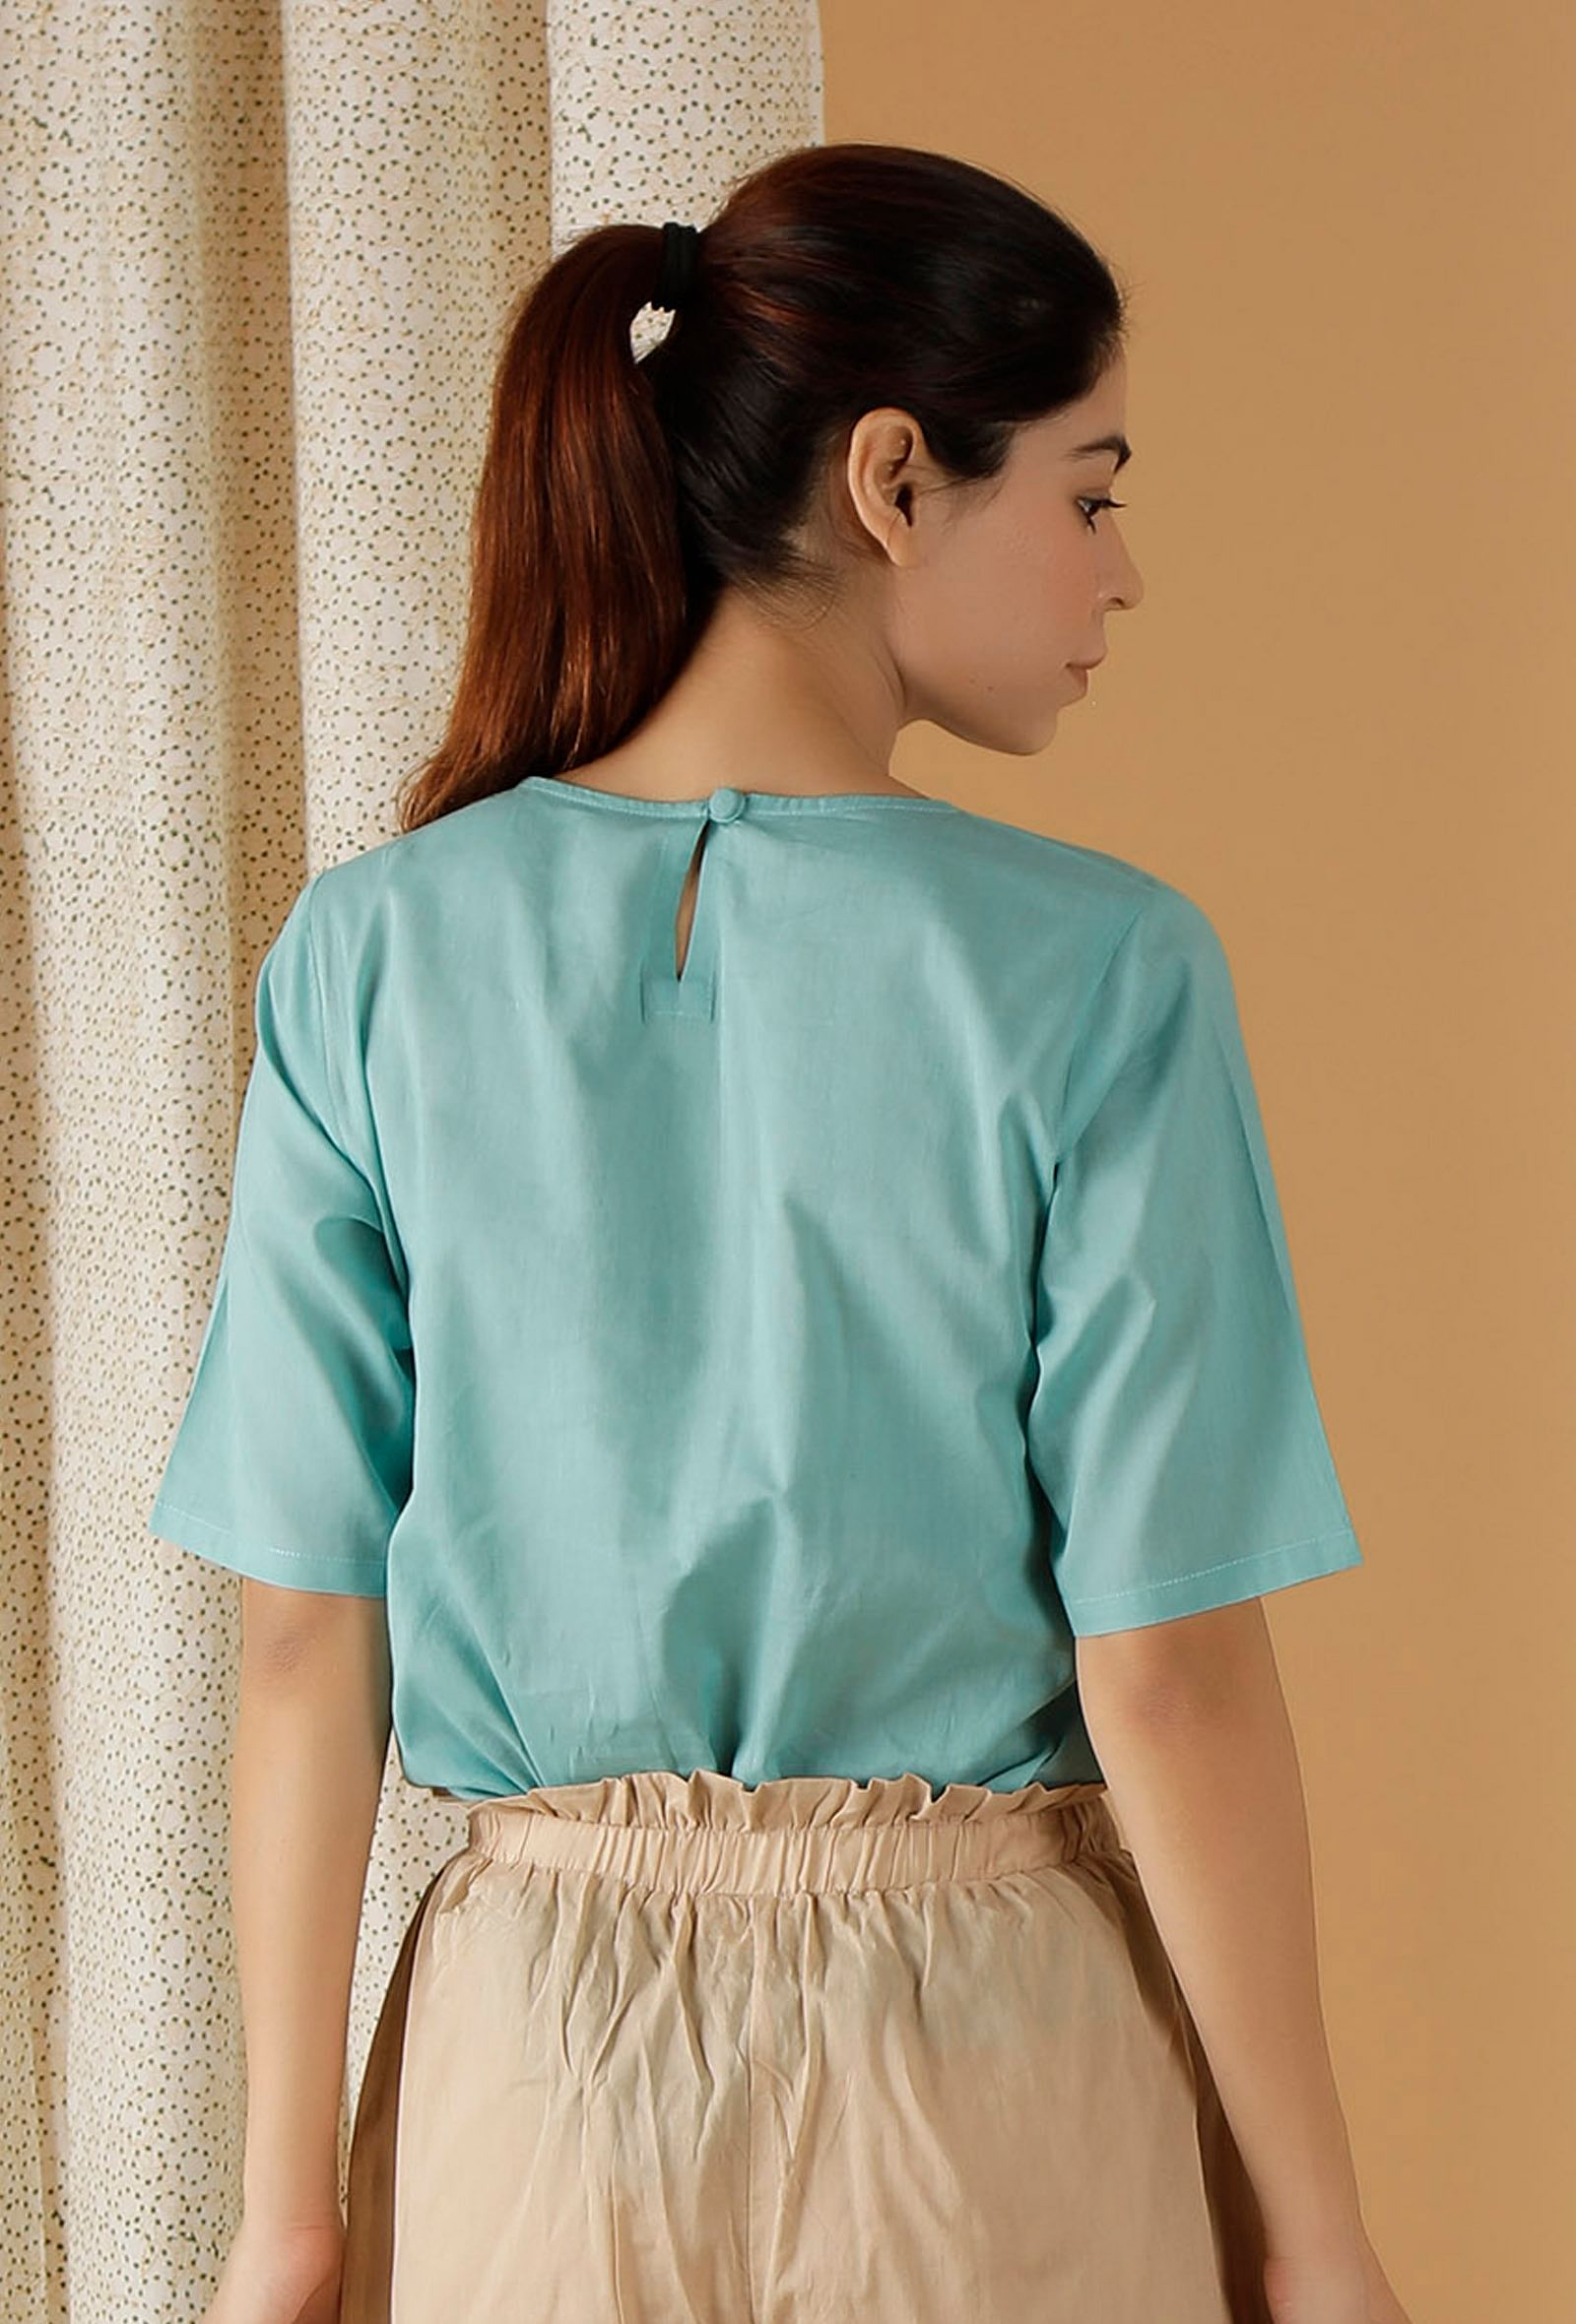 Mulmul Cotton Solid Turquoise Blue Top